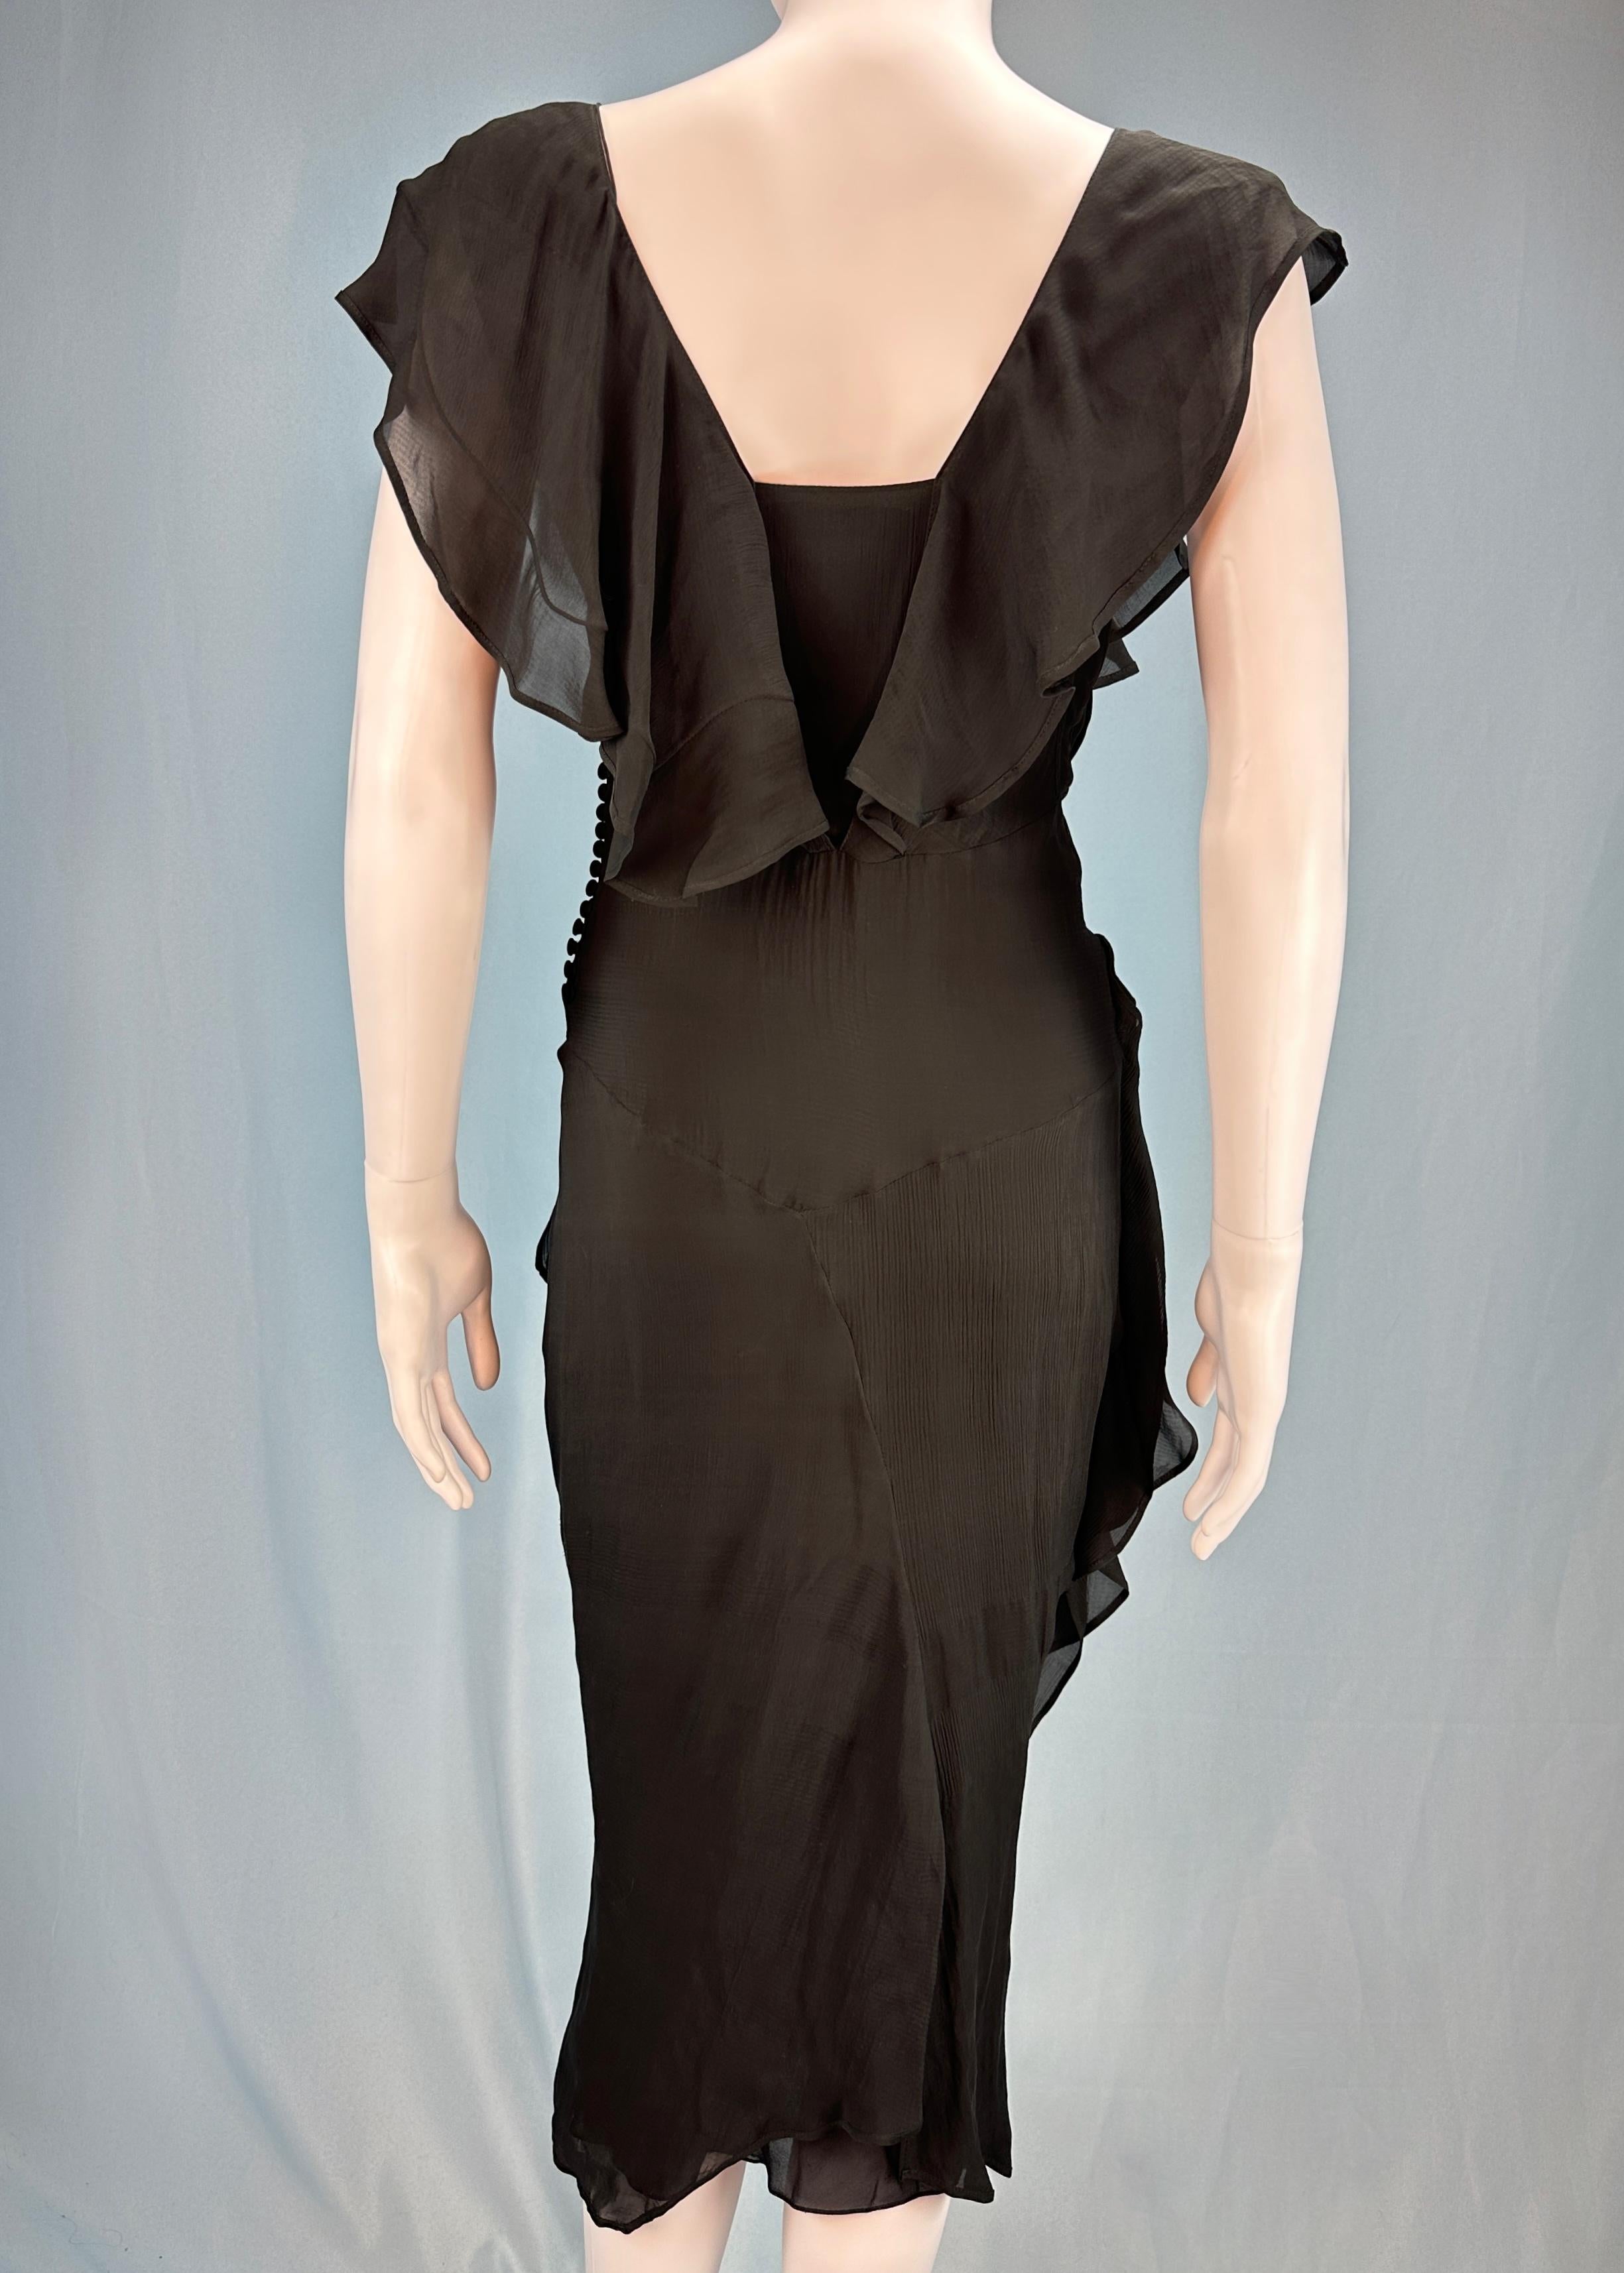 Dior Fall 2006 Black Silk Chiffon Ruffle Dress In Excellent Condition For Sale In Hertfordshire, GB